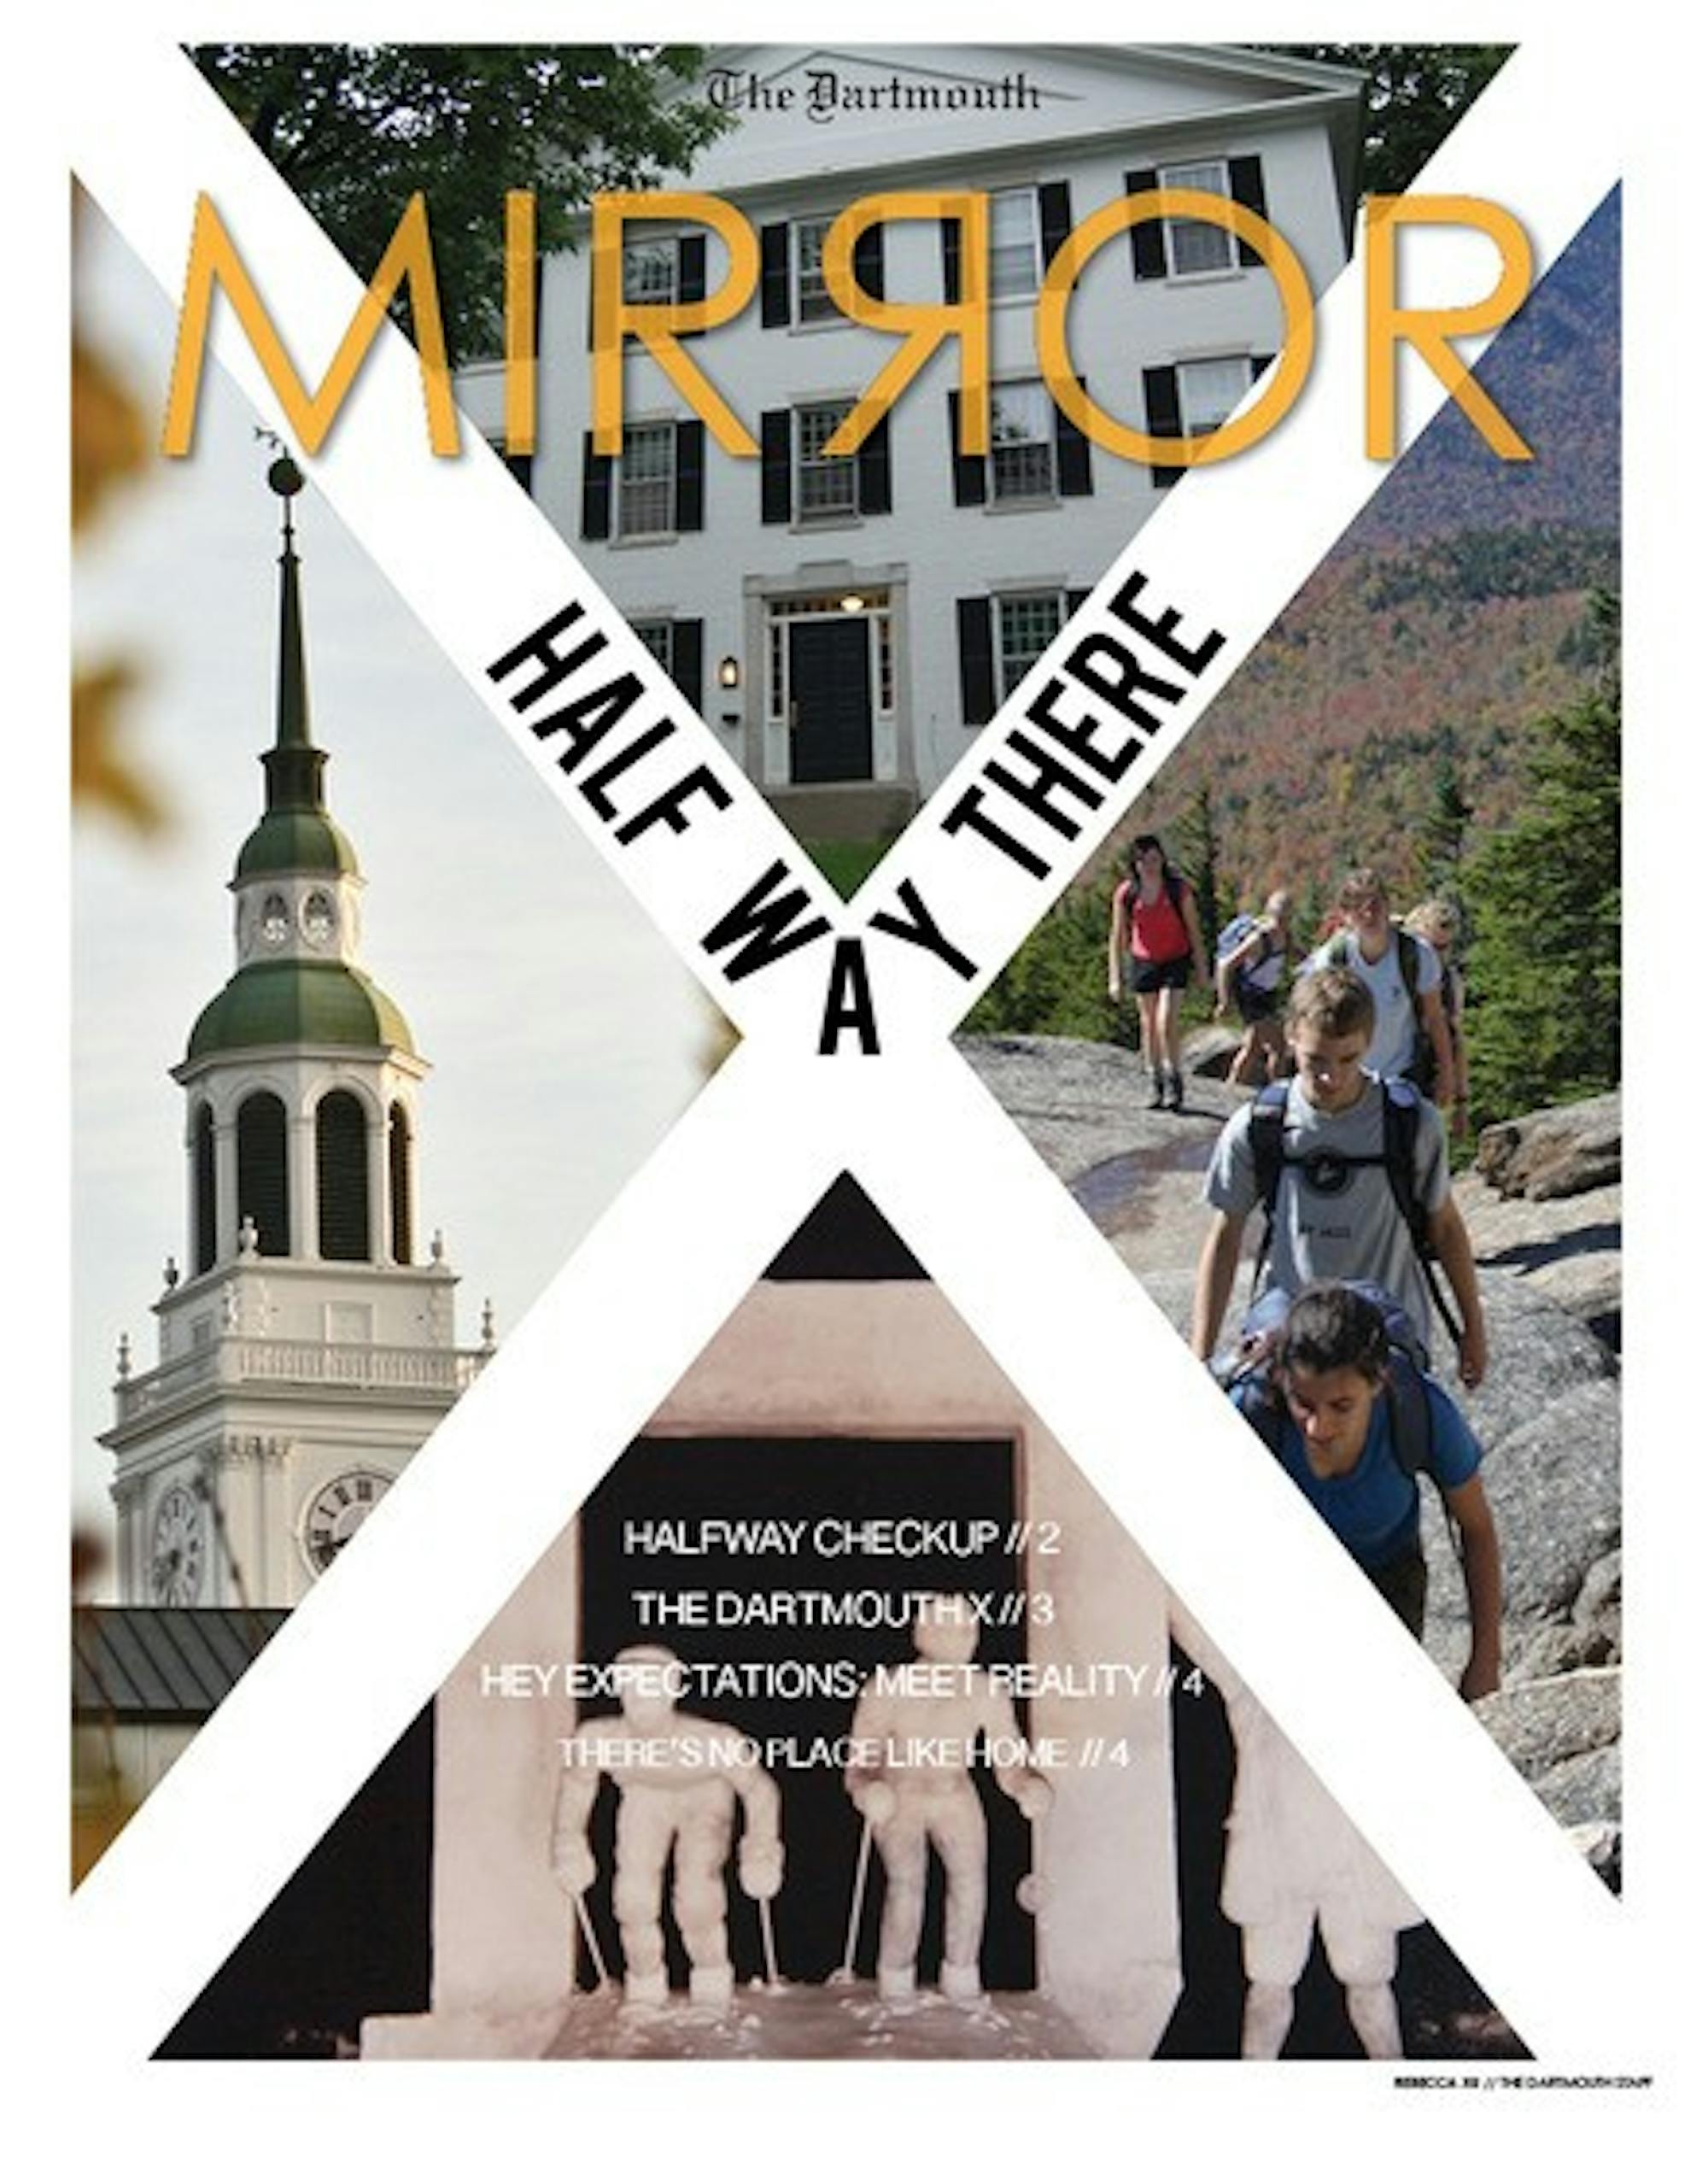 In this week's mirror, we check out the halfway point of our time at Dartmouth, the Dartmouth X, expectations and realities of sophomore summer and what the College would be like in a different state.